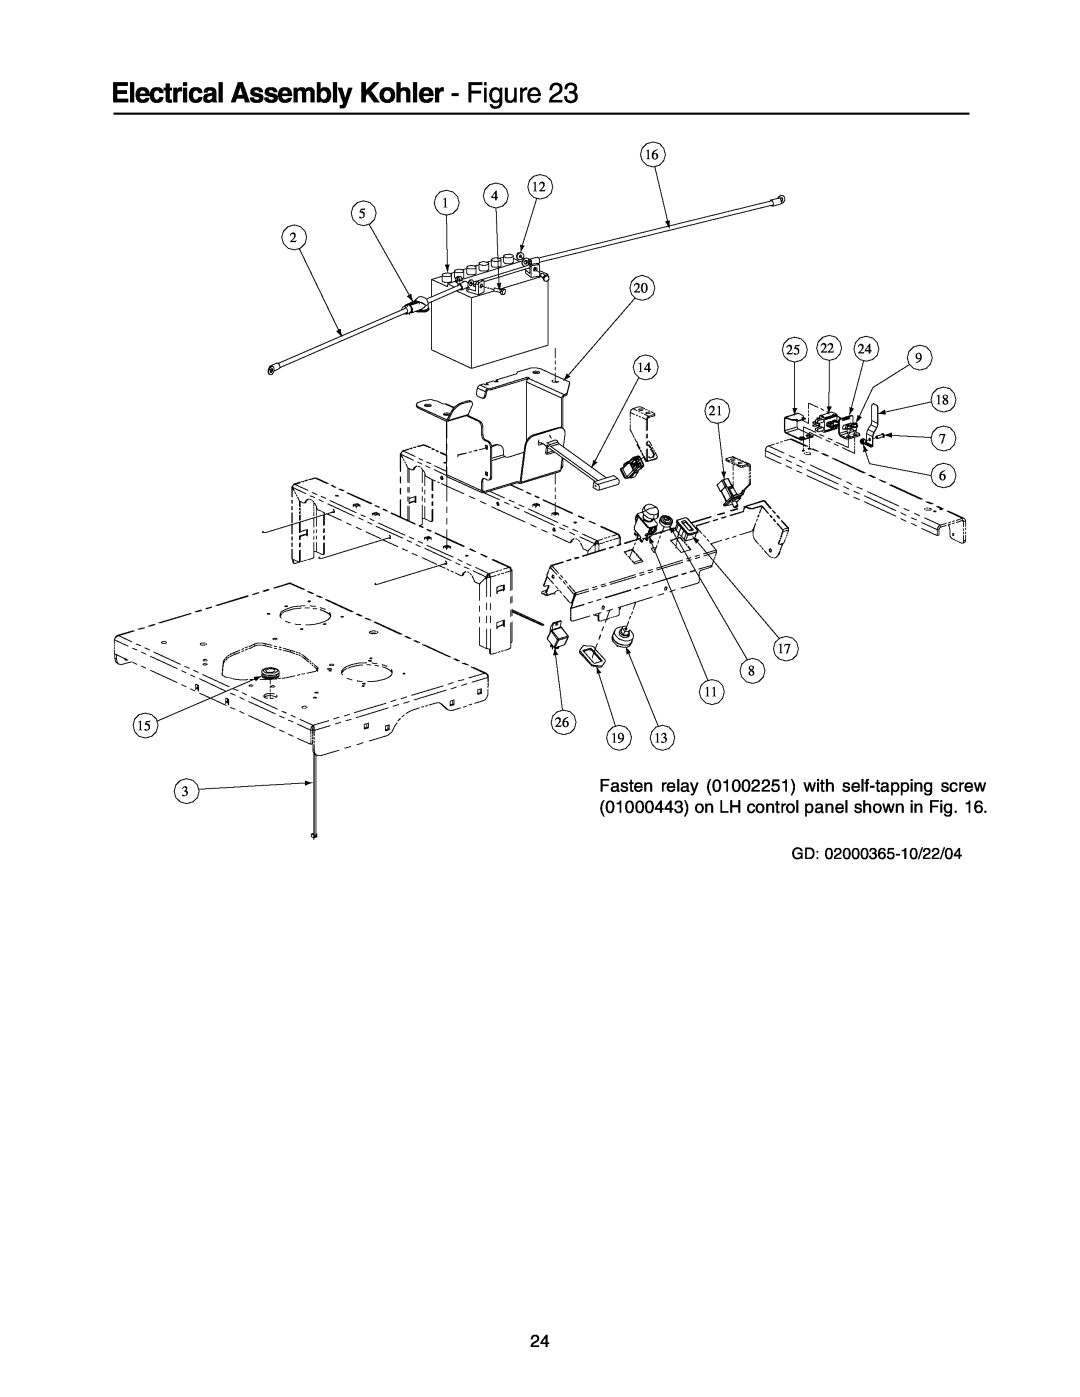 Cub Cadet Lawn Mower manual Electrical Assembly Kohler - Figure, Fasten relay 01002251 with self-tapping screw, 25 22 